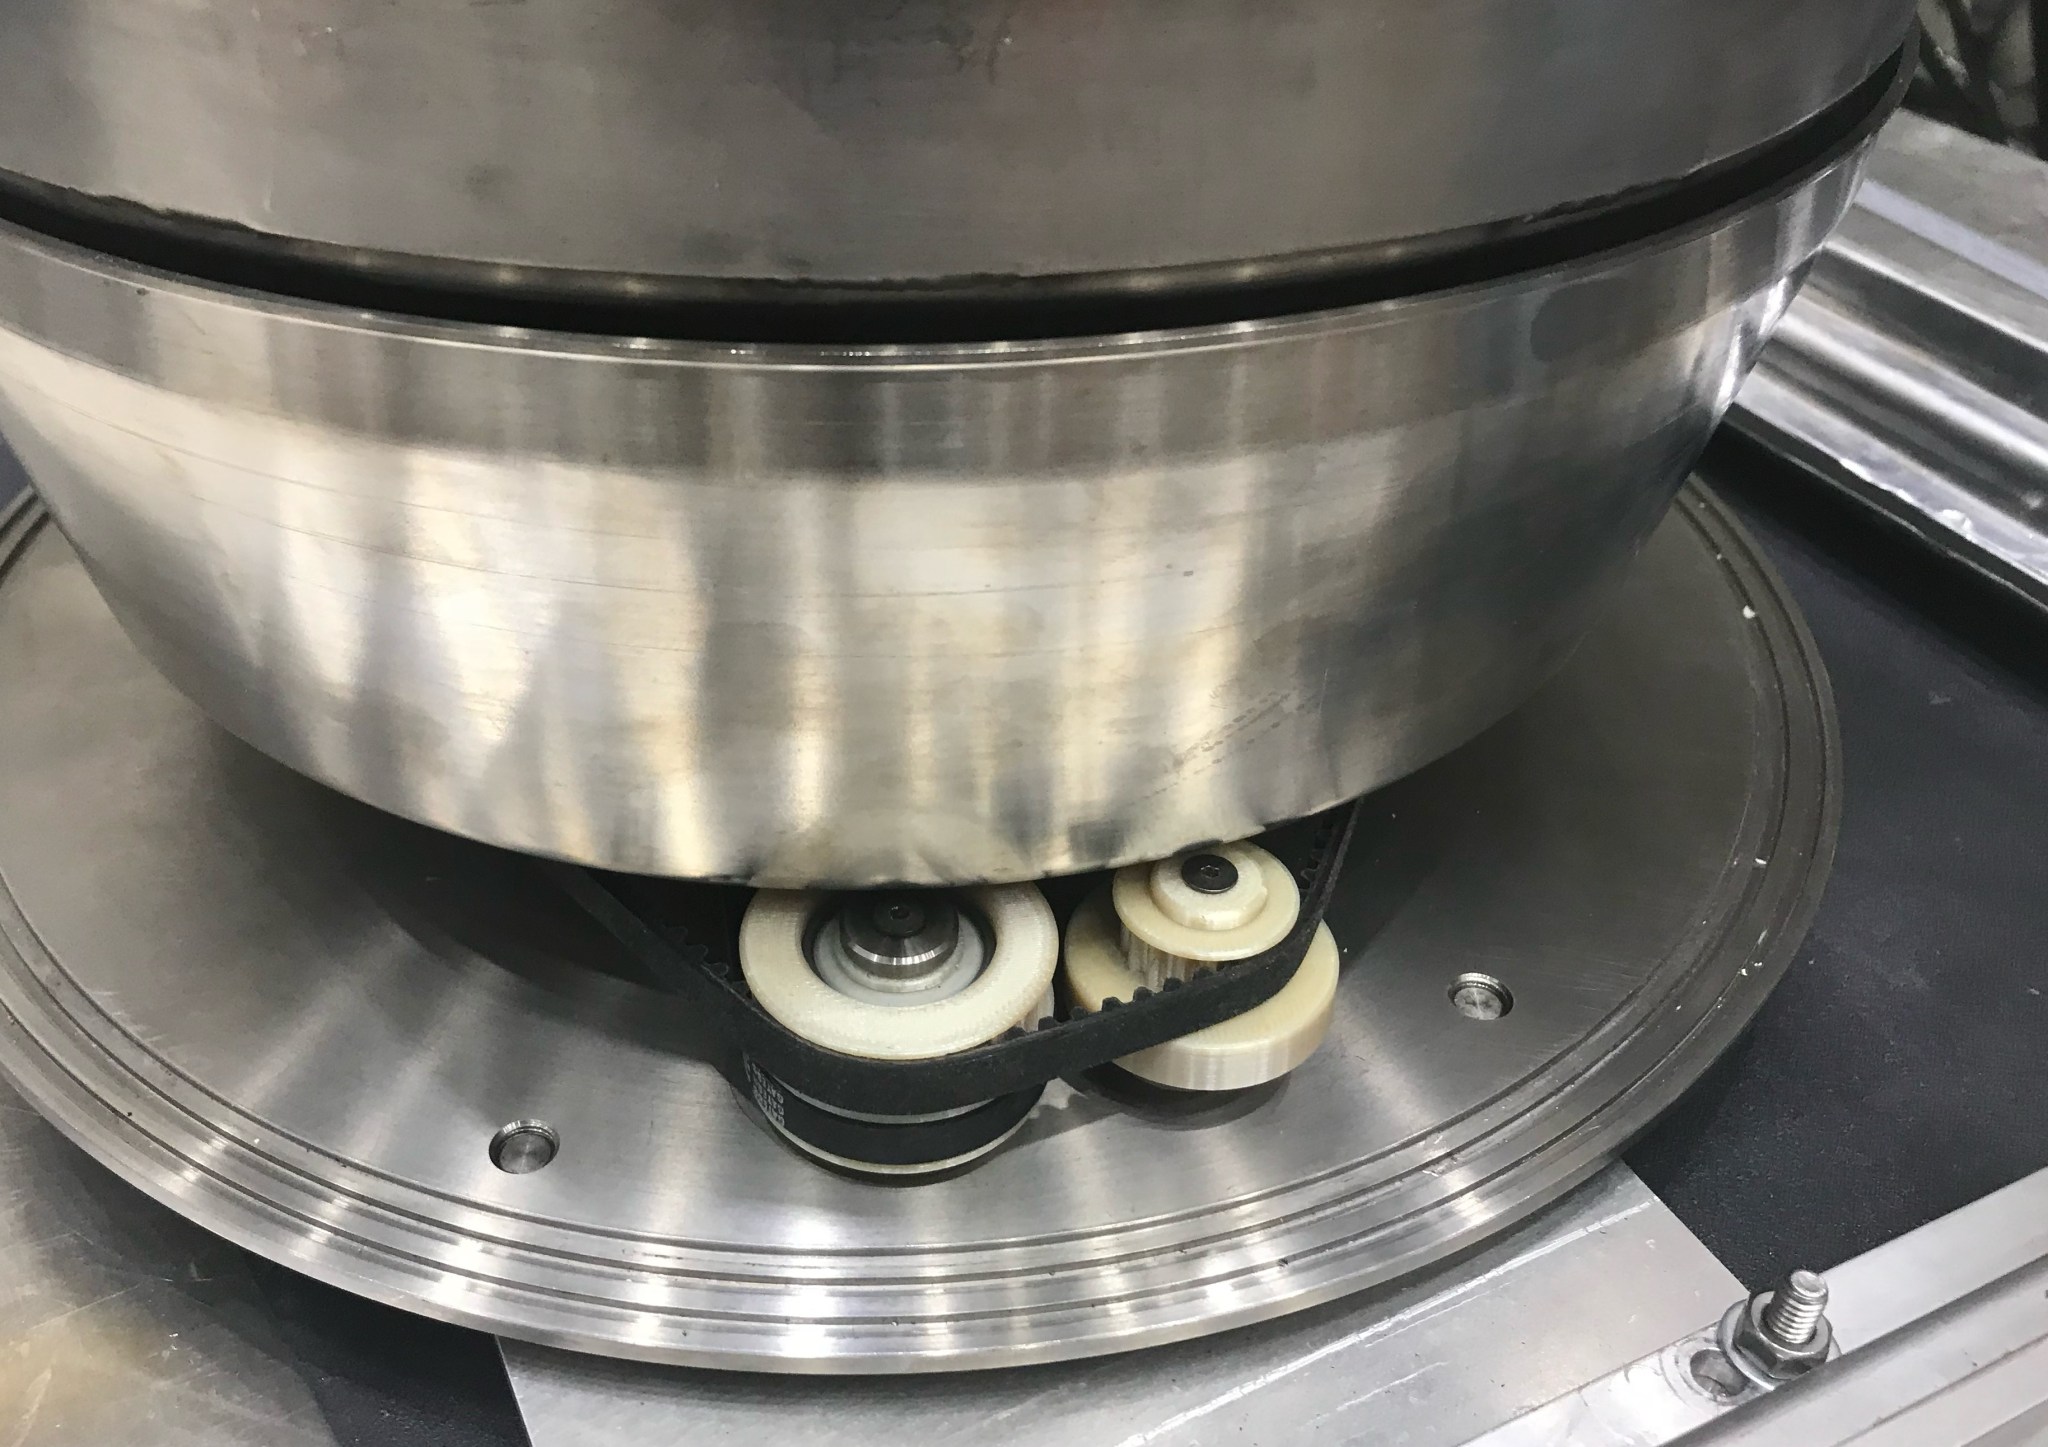 The newly redesigned and 3D-printed plastic pulley undergoes testing.